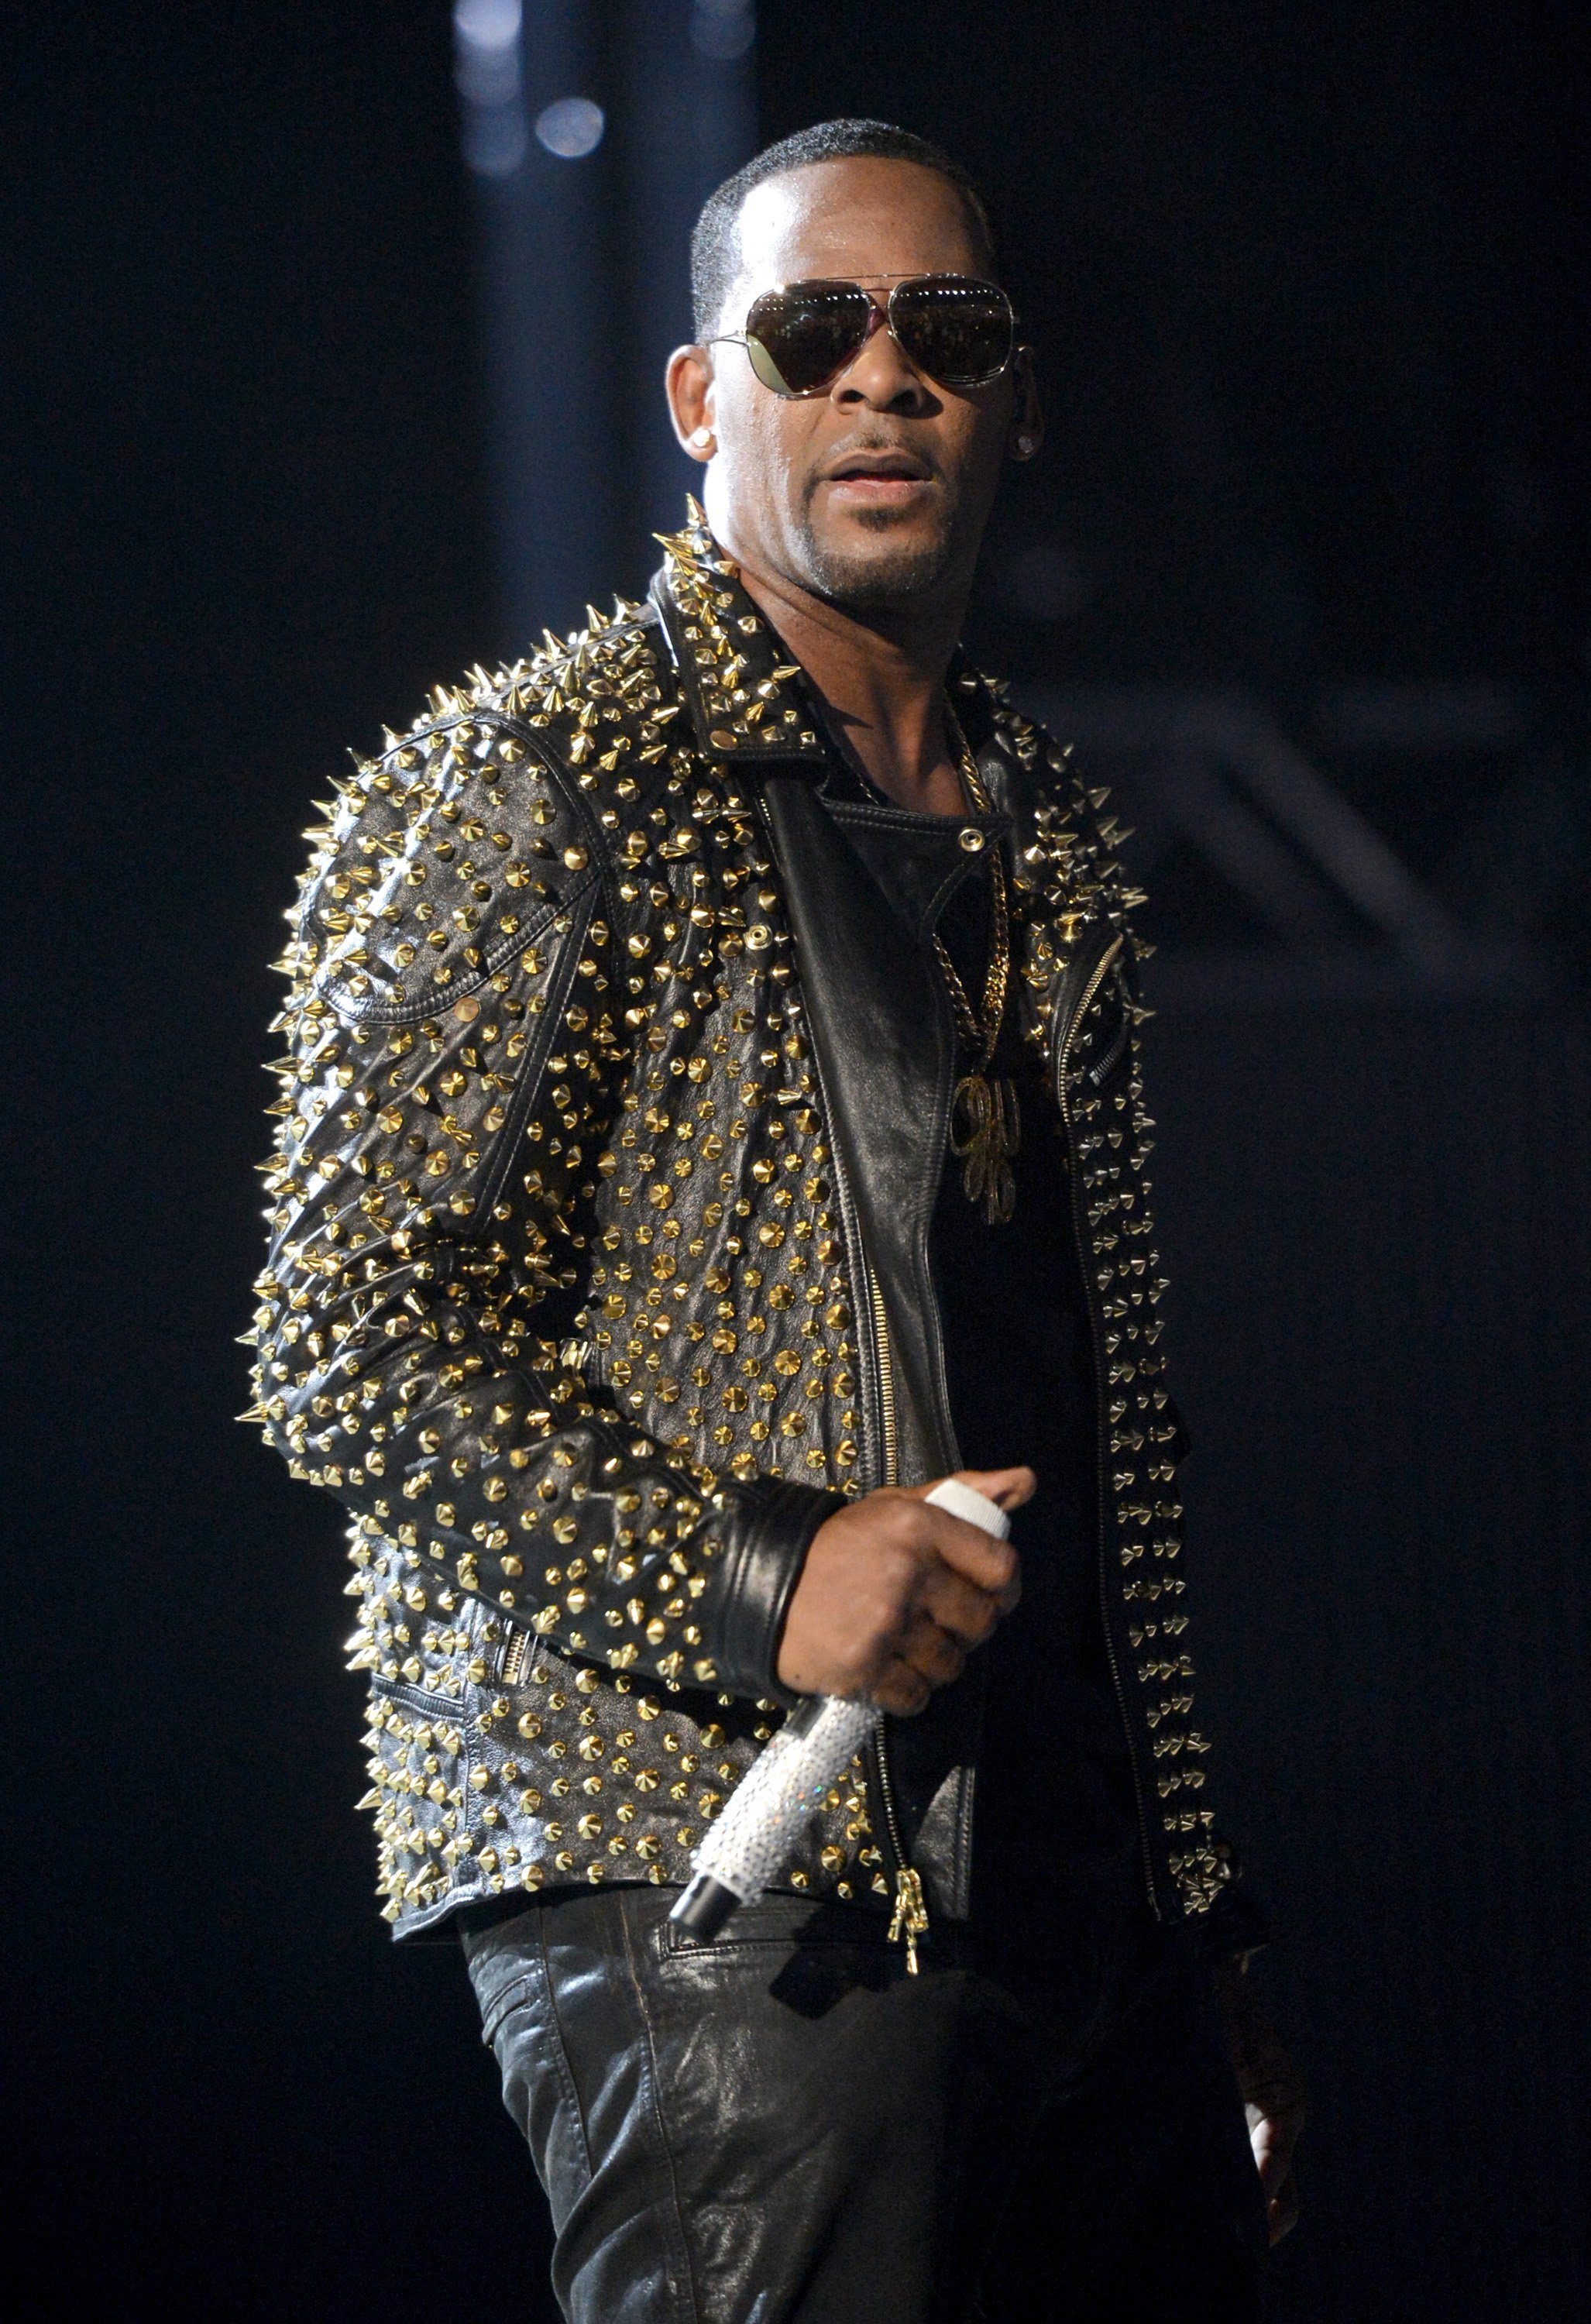 R. Kelly performing at the 2013 BET Awards show. | Photo: Getty Images